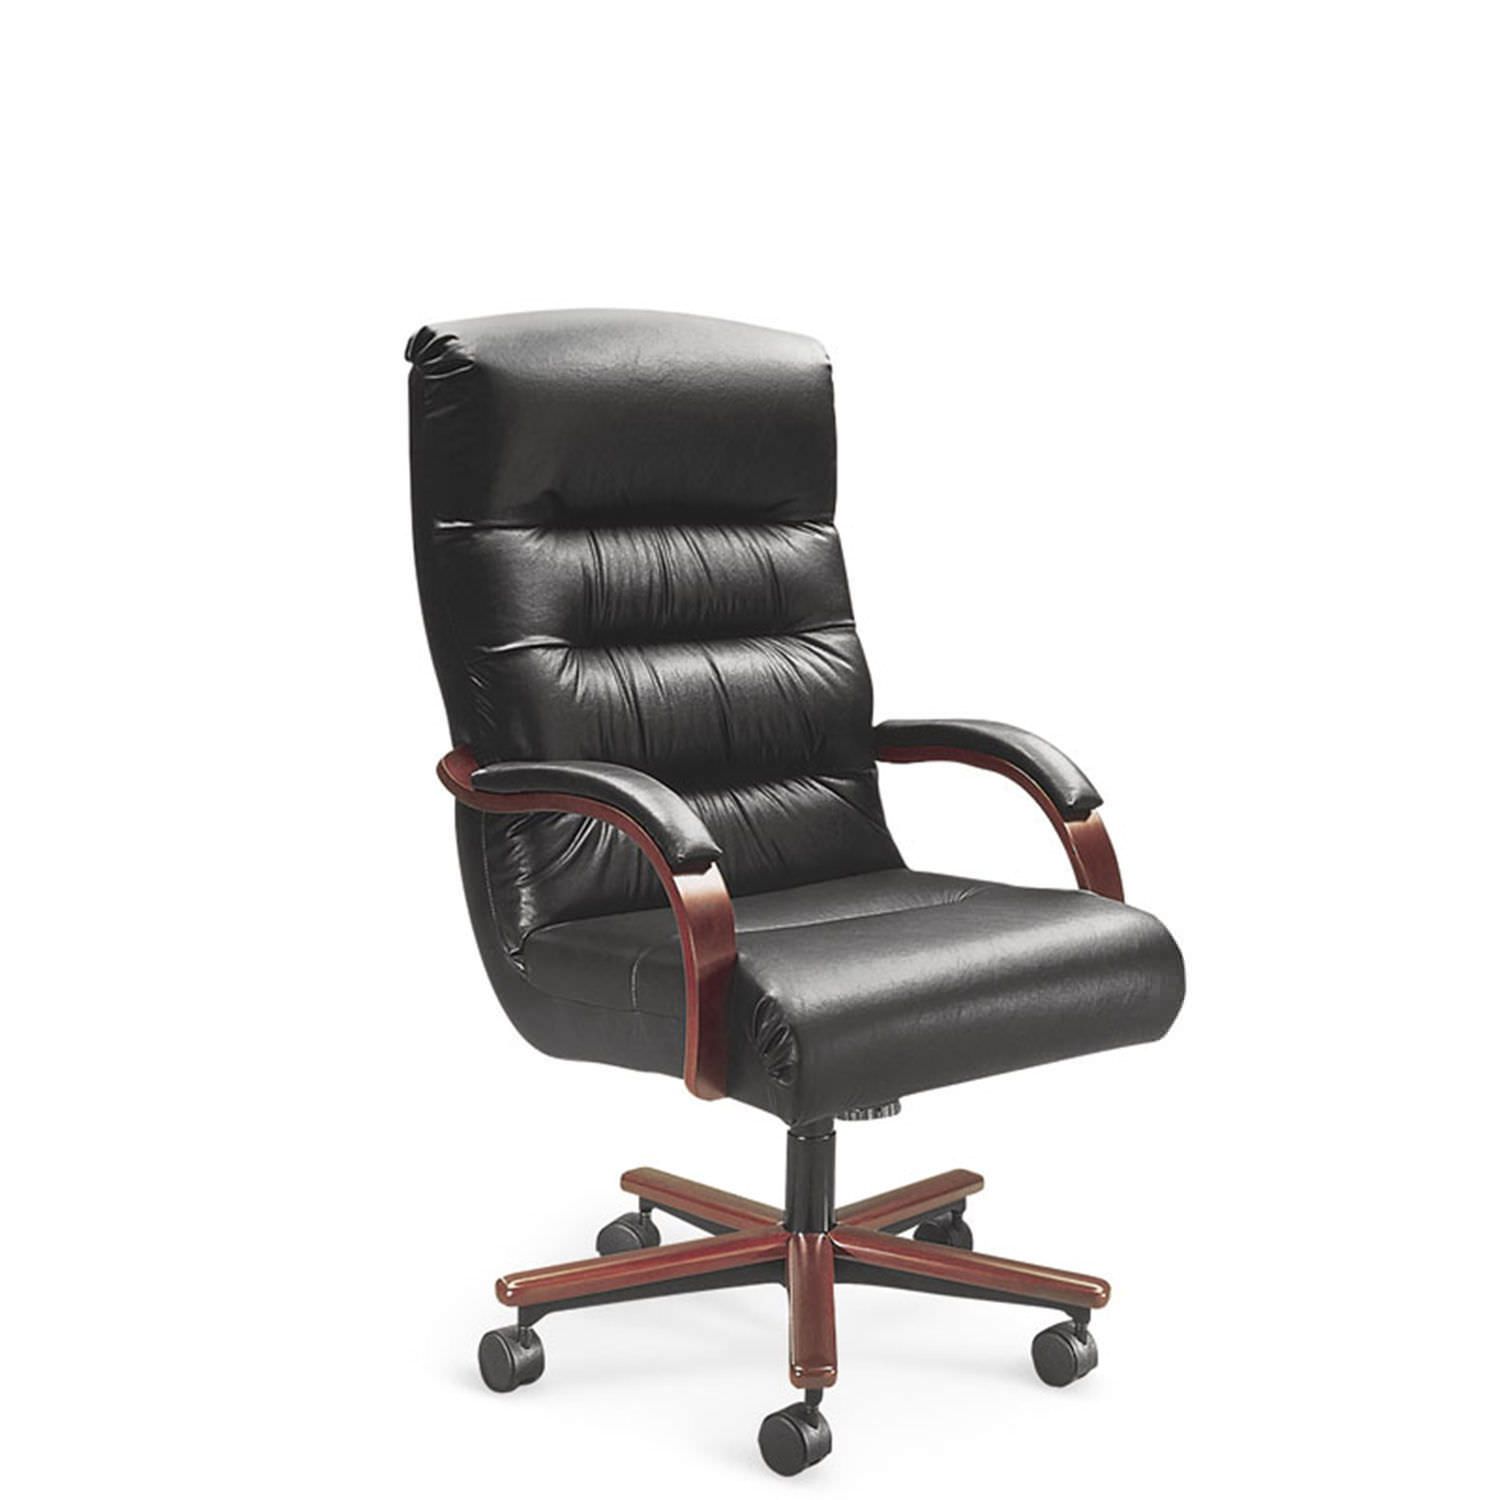 Health Management And Leadership Portal Office Chair Executive